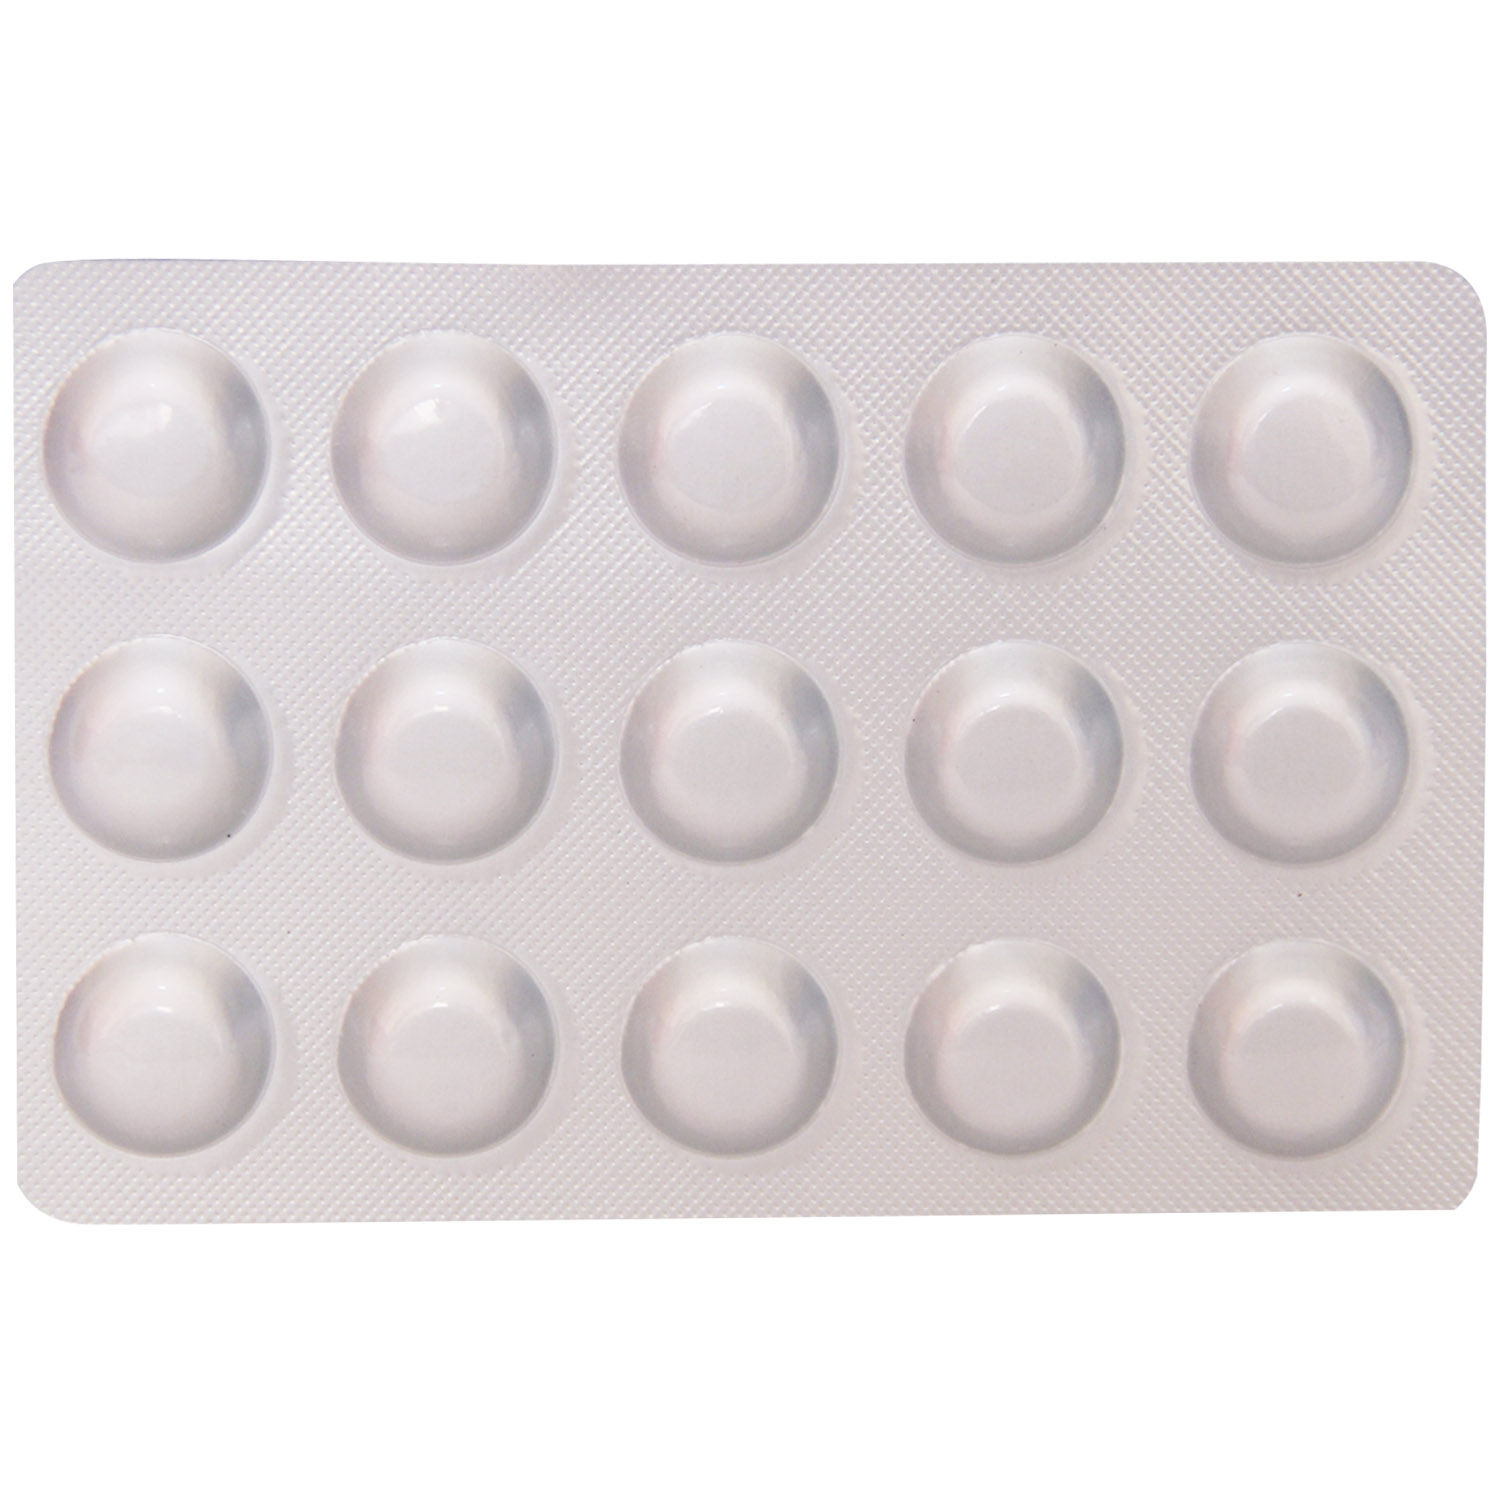 CETANIL T TABLET, Pack of 10 TABLETS